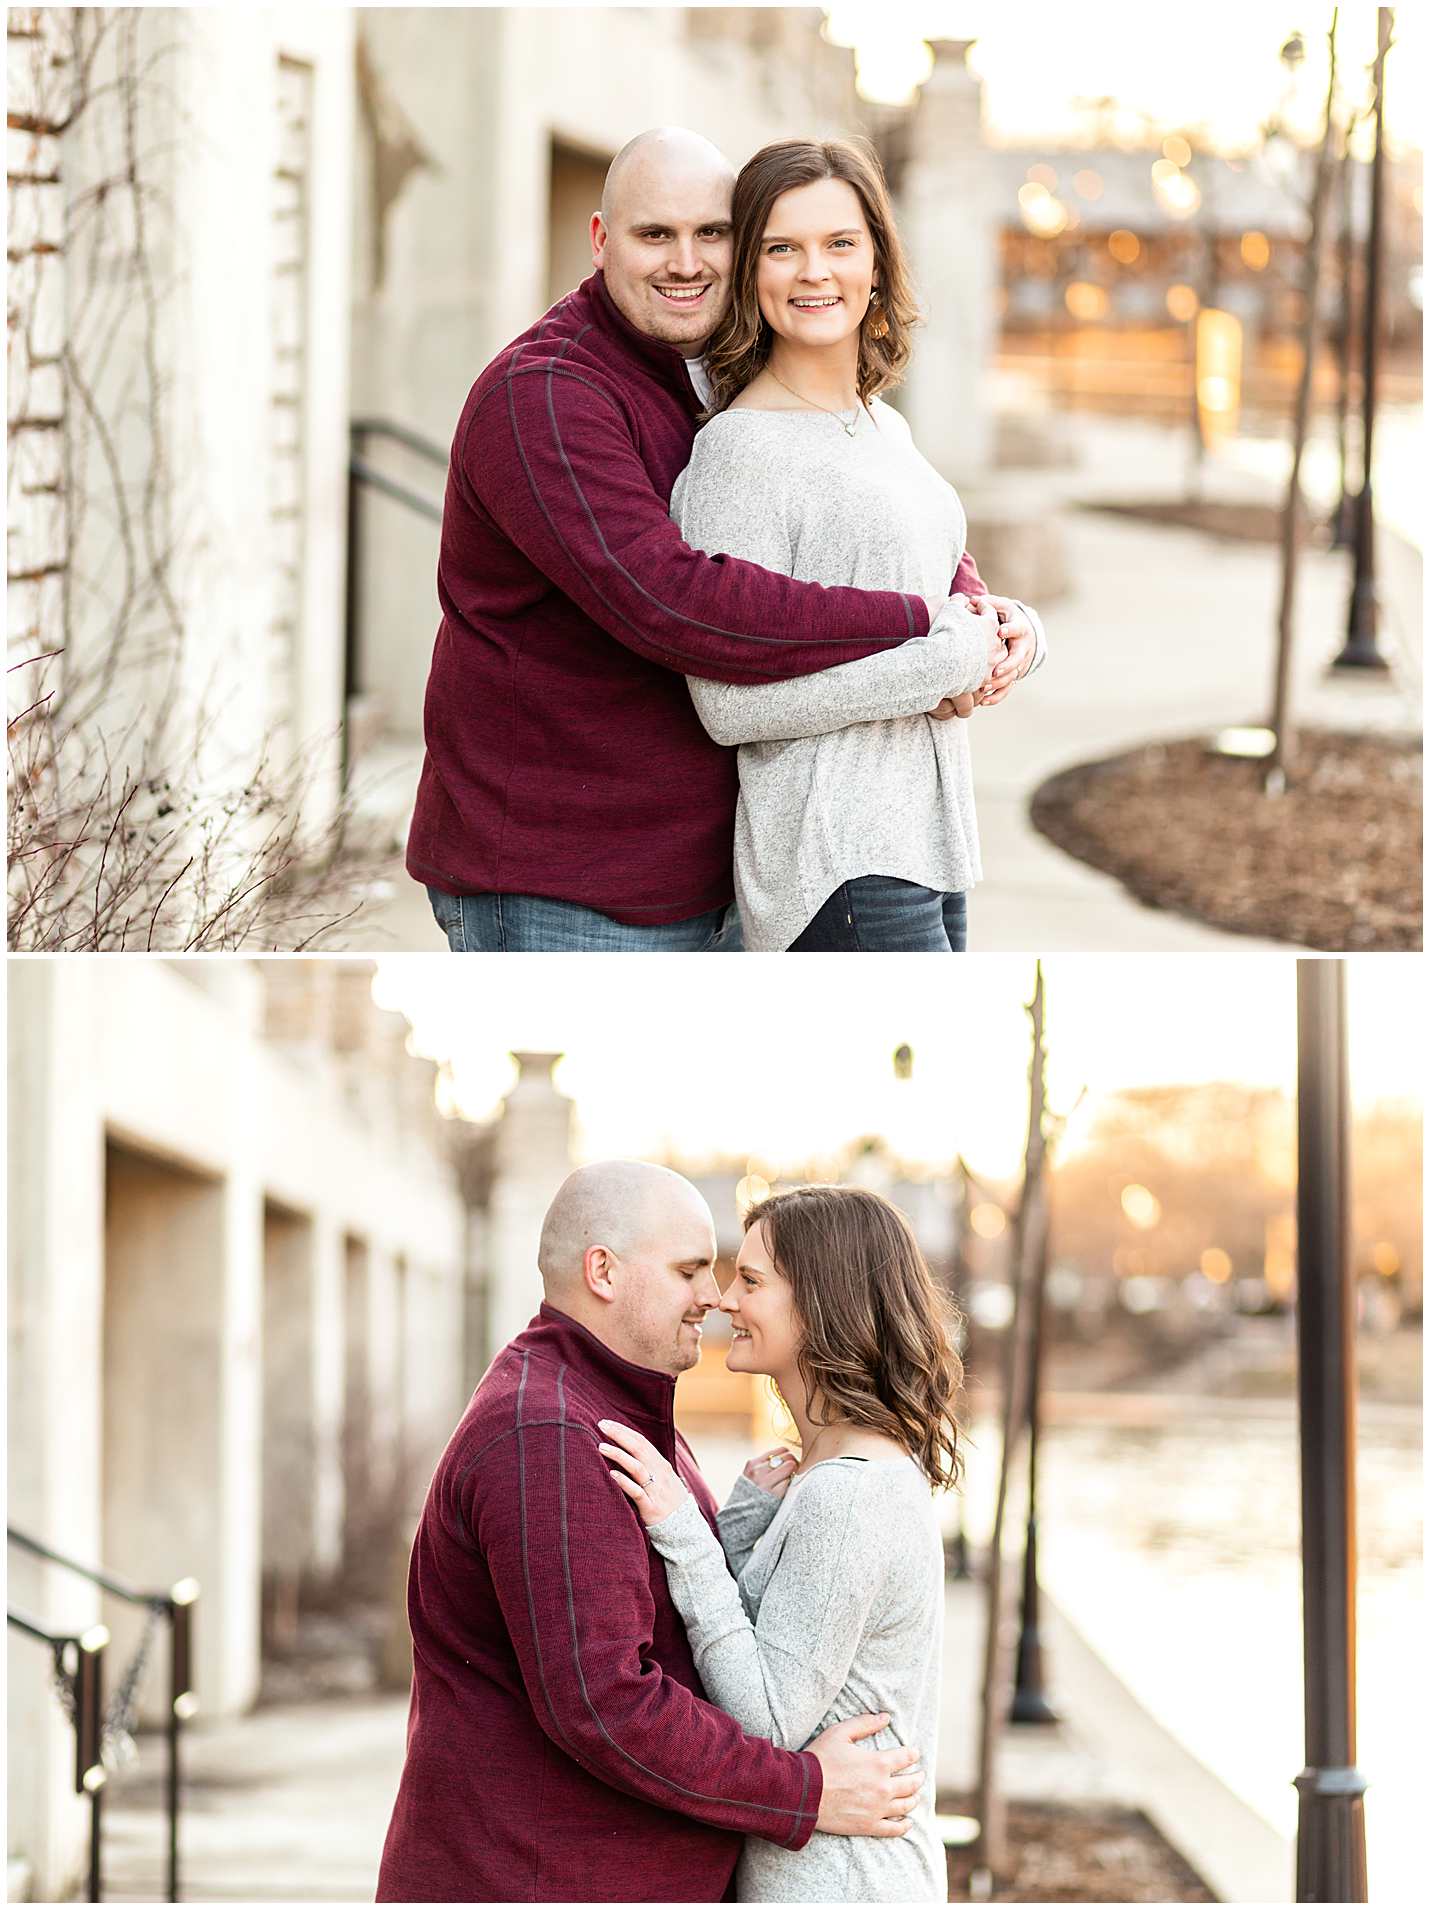 Riverwalk-Naperville-Illinois-Engagement-Chicago-Suburbs-River-Photography